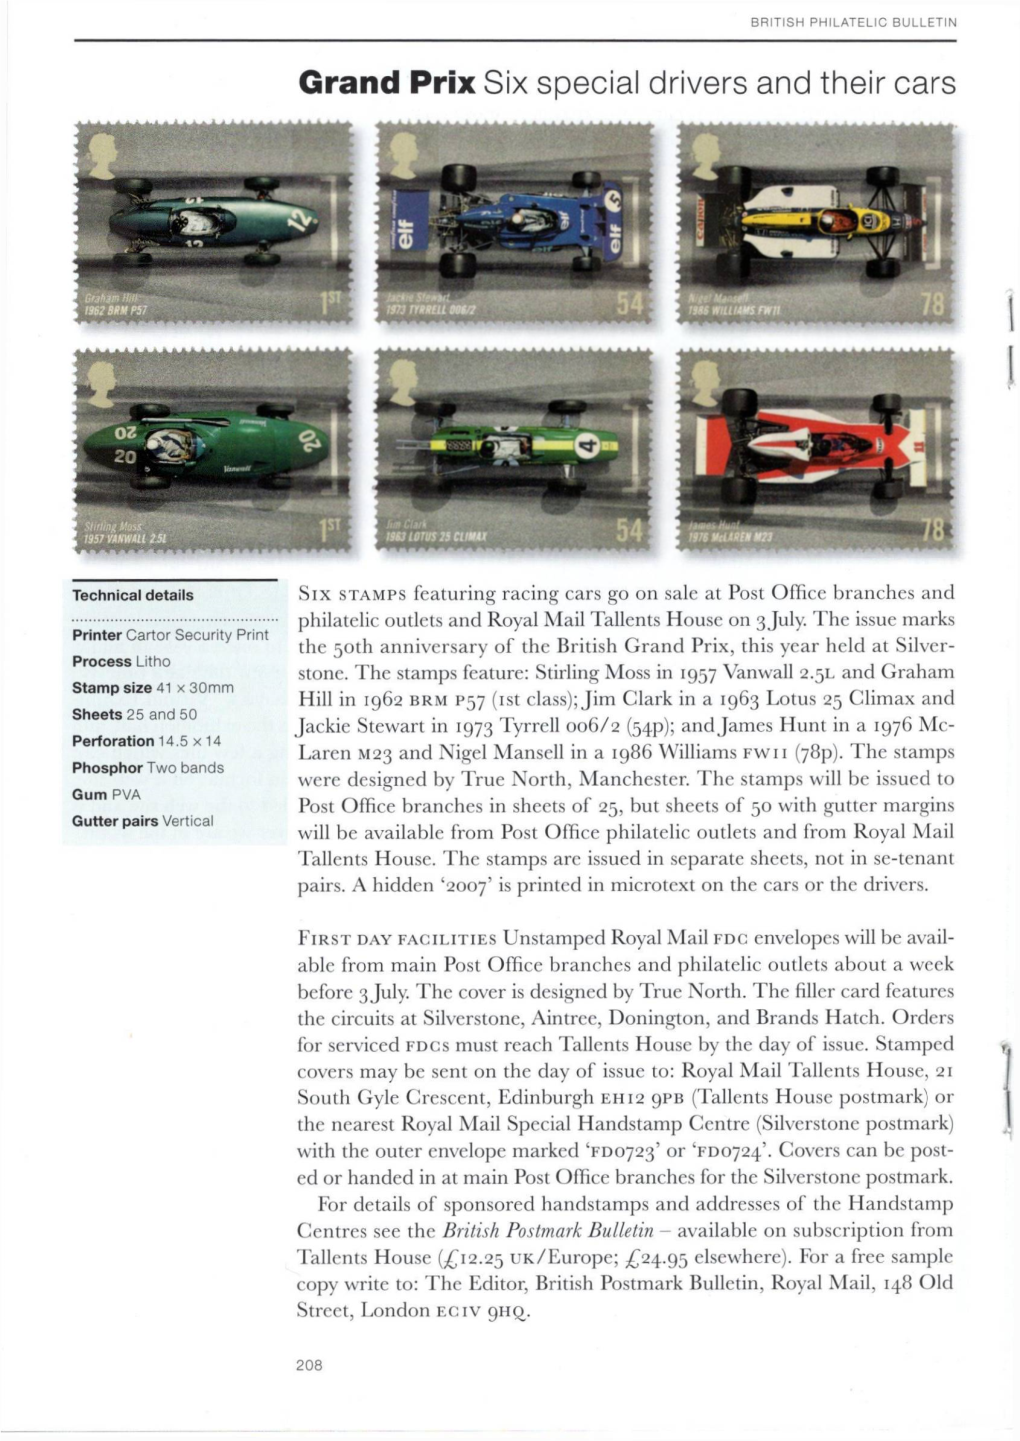 Grand Prix Six Special Drivers and Their Cars